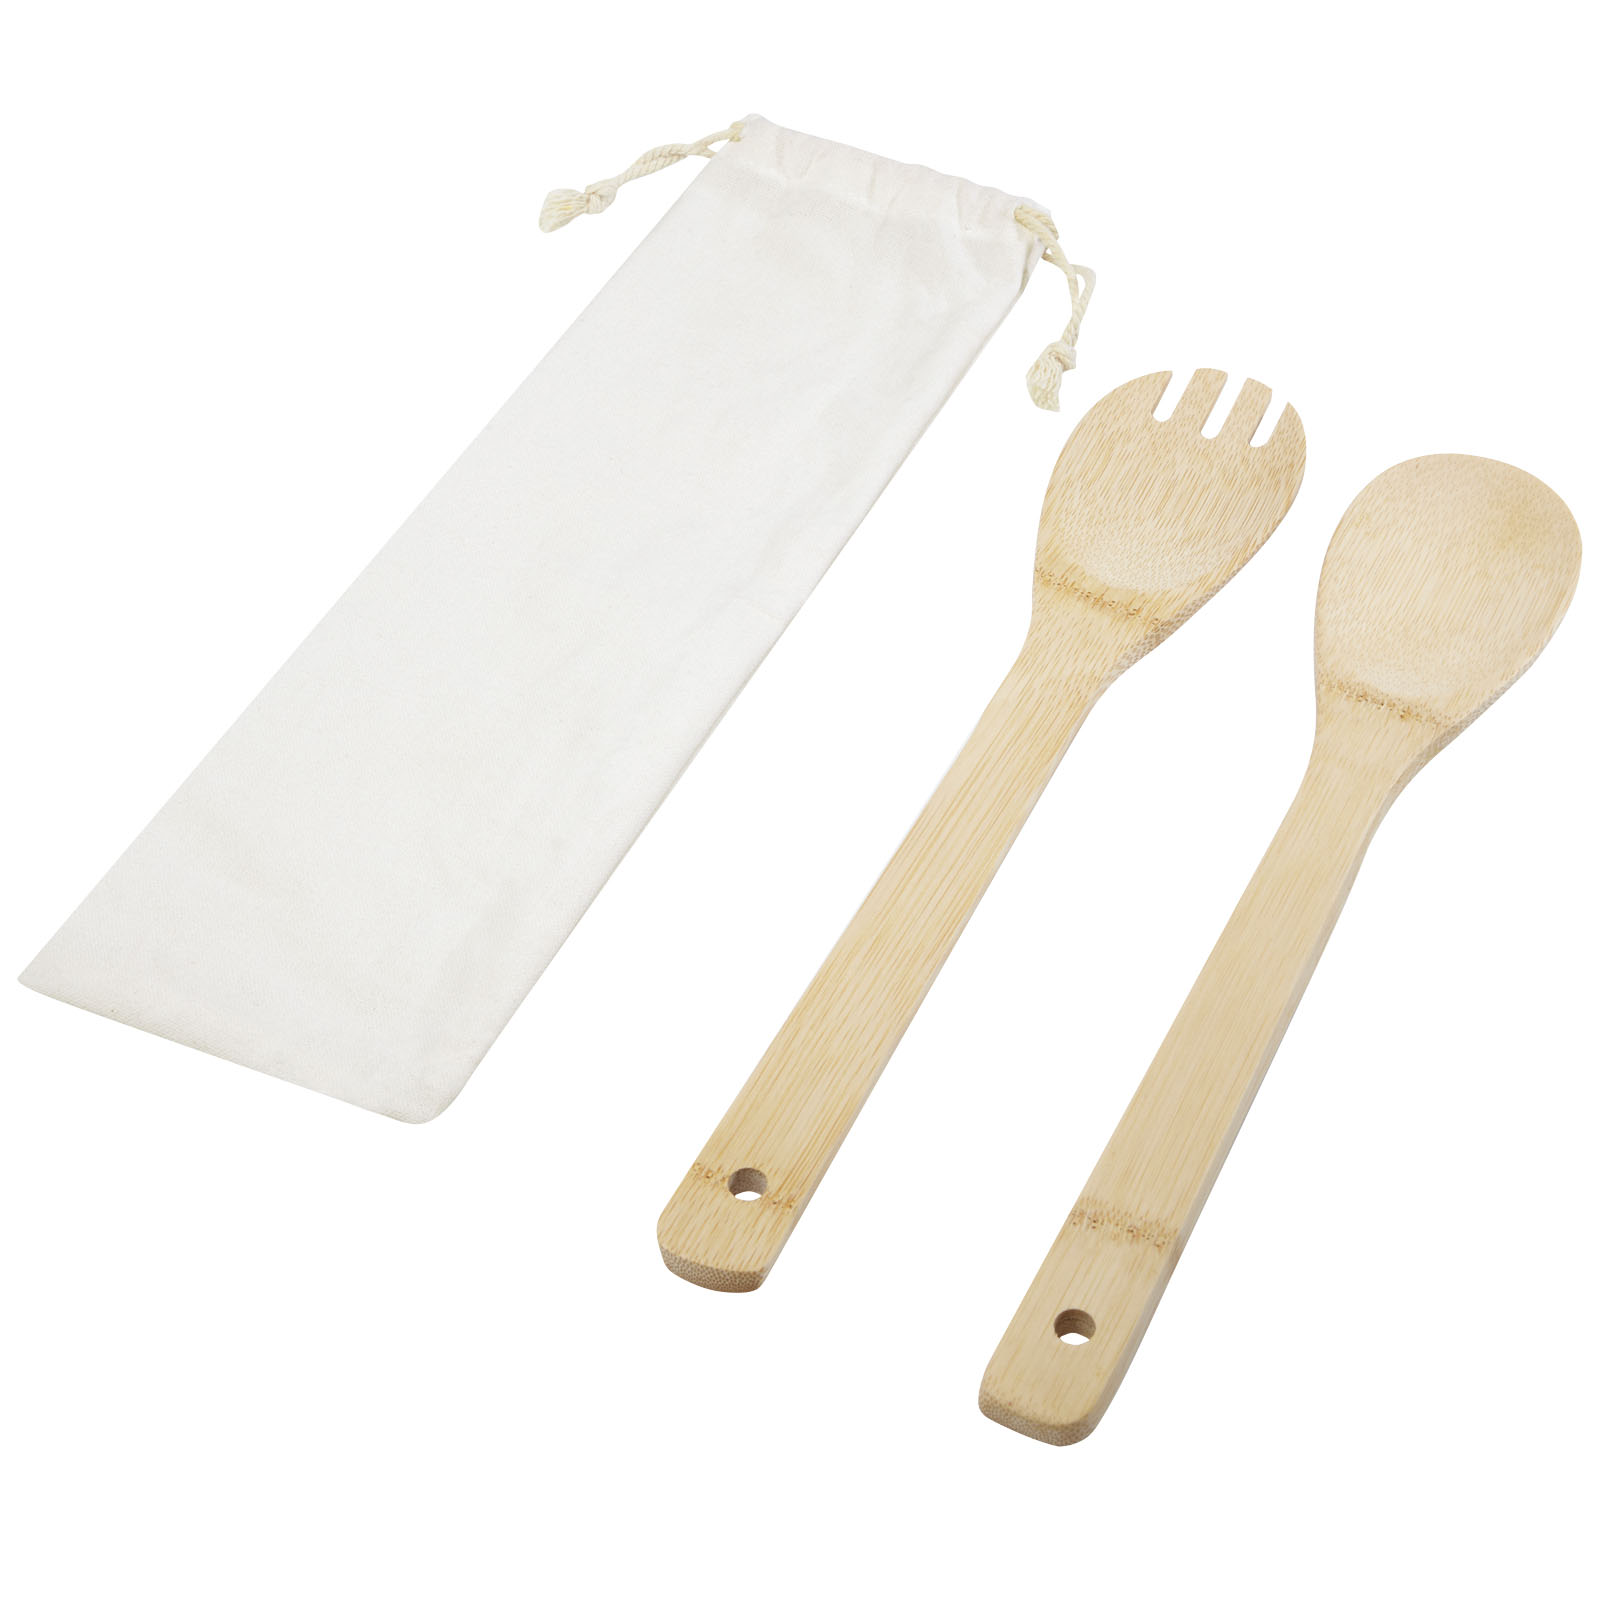 Advertising Kitchenware - Endiv bamboo salad spoon and fork